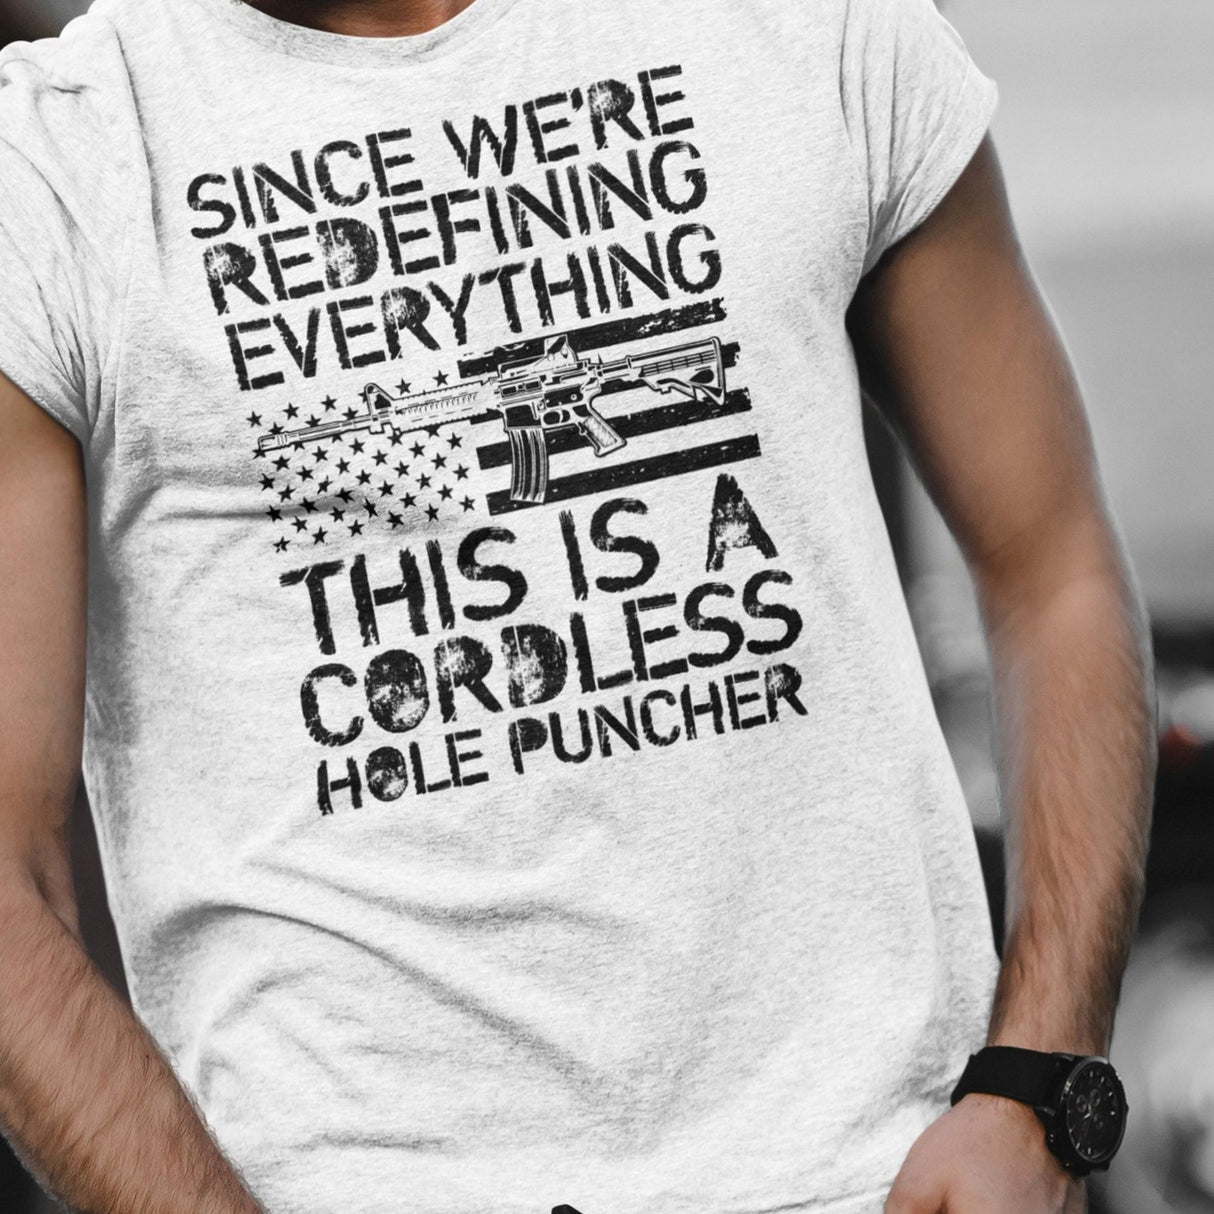 since-were-redefining-everything-this-is-a-cordless-hole-puncher-woke-tee-ar15-t-shirt-cordless-tee-t-shirt-tee#color_white